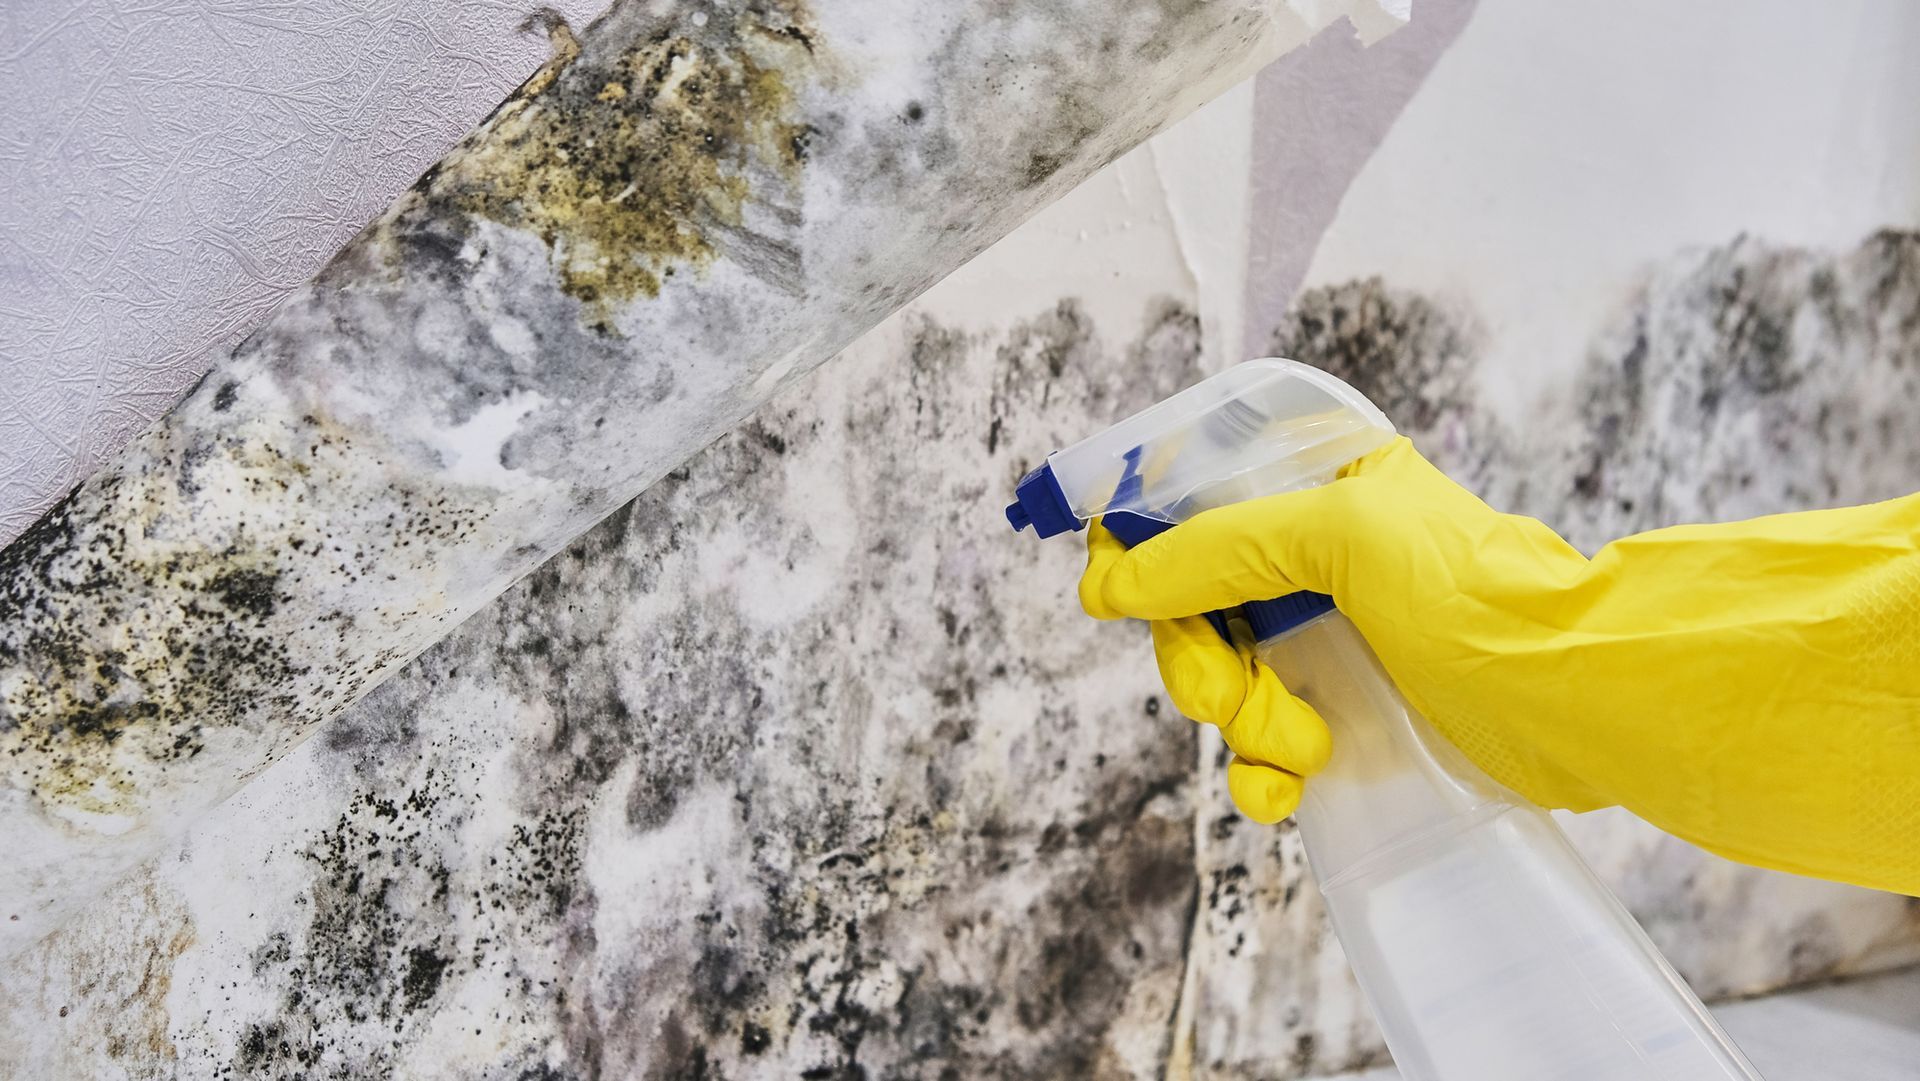 A person wearing yellow gloves is spraying mold on a wall.